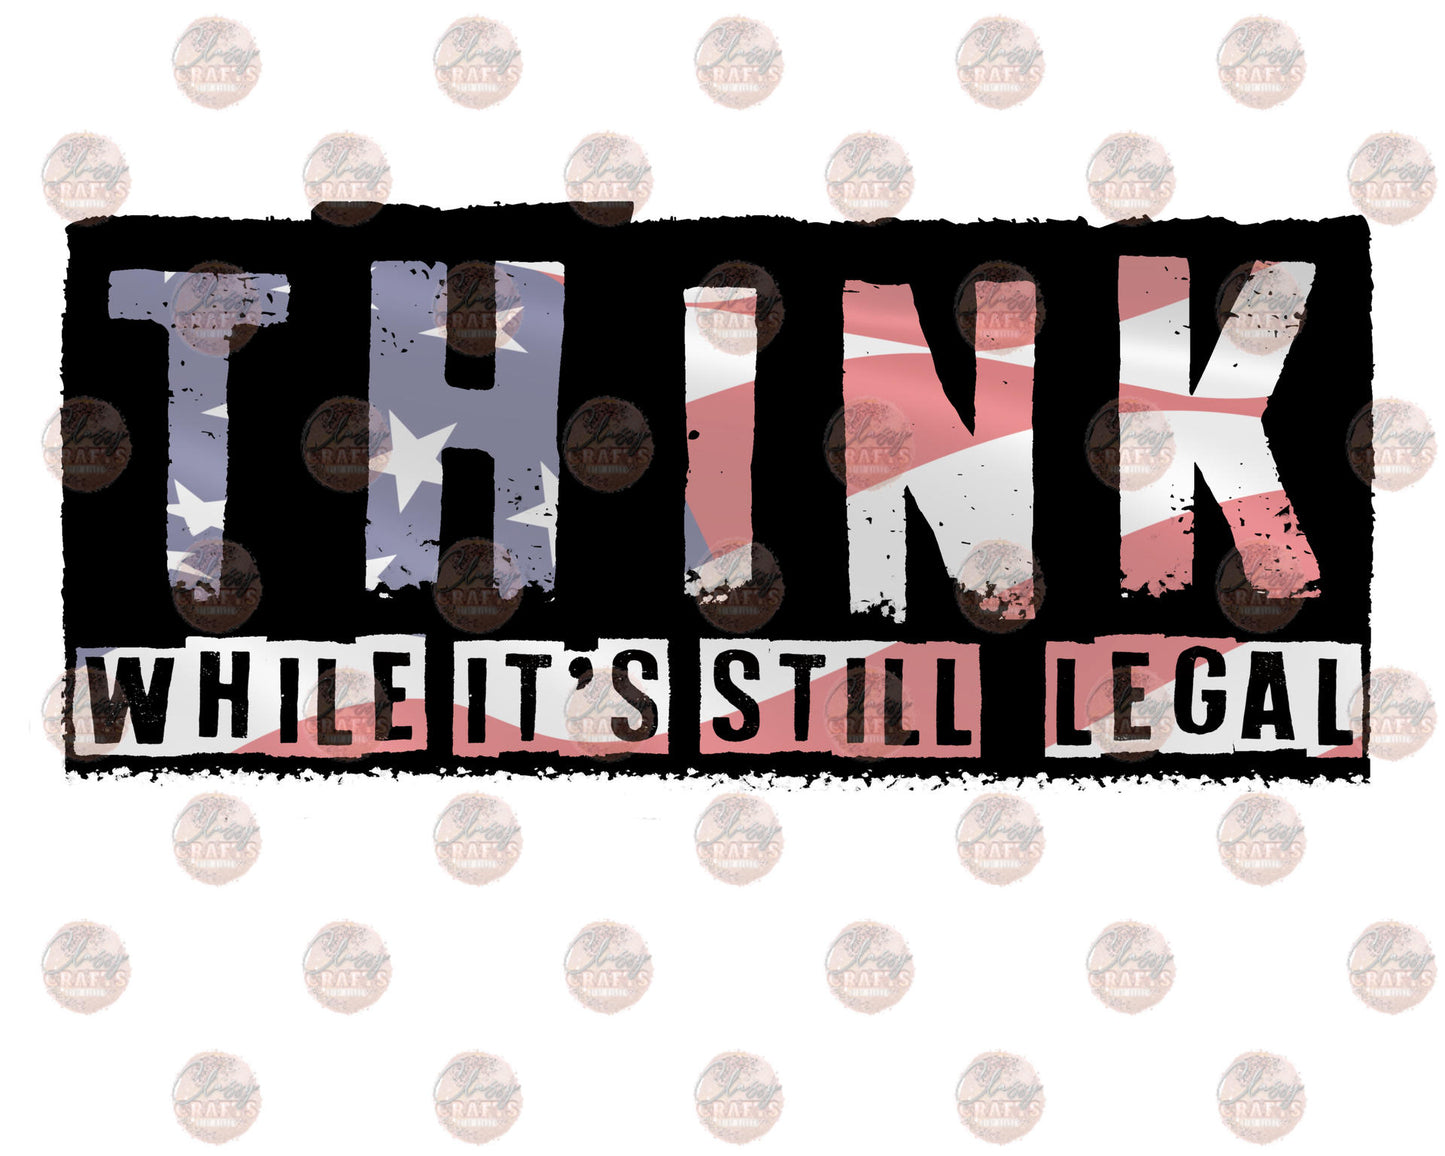 Think While It's Still Legal - Sublimation Transfer